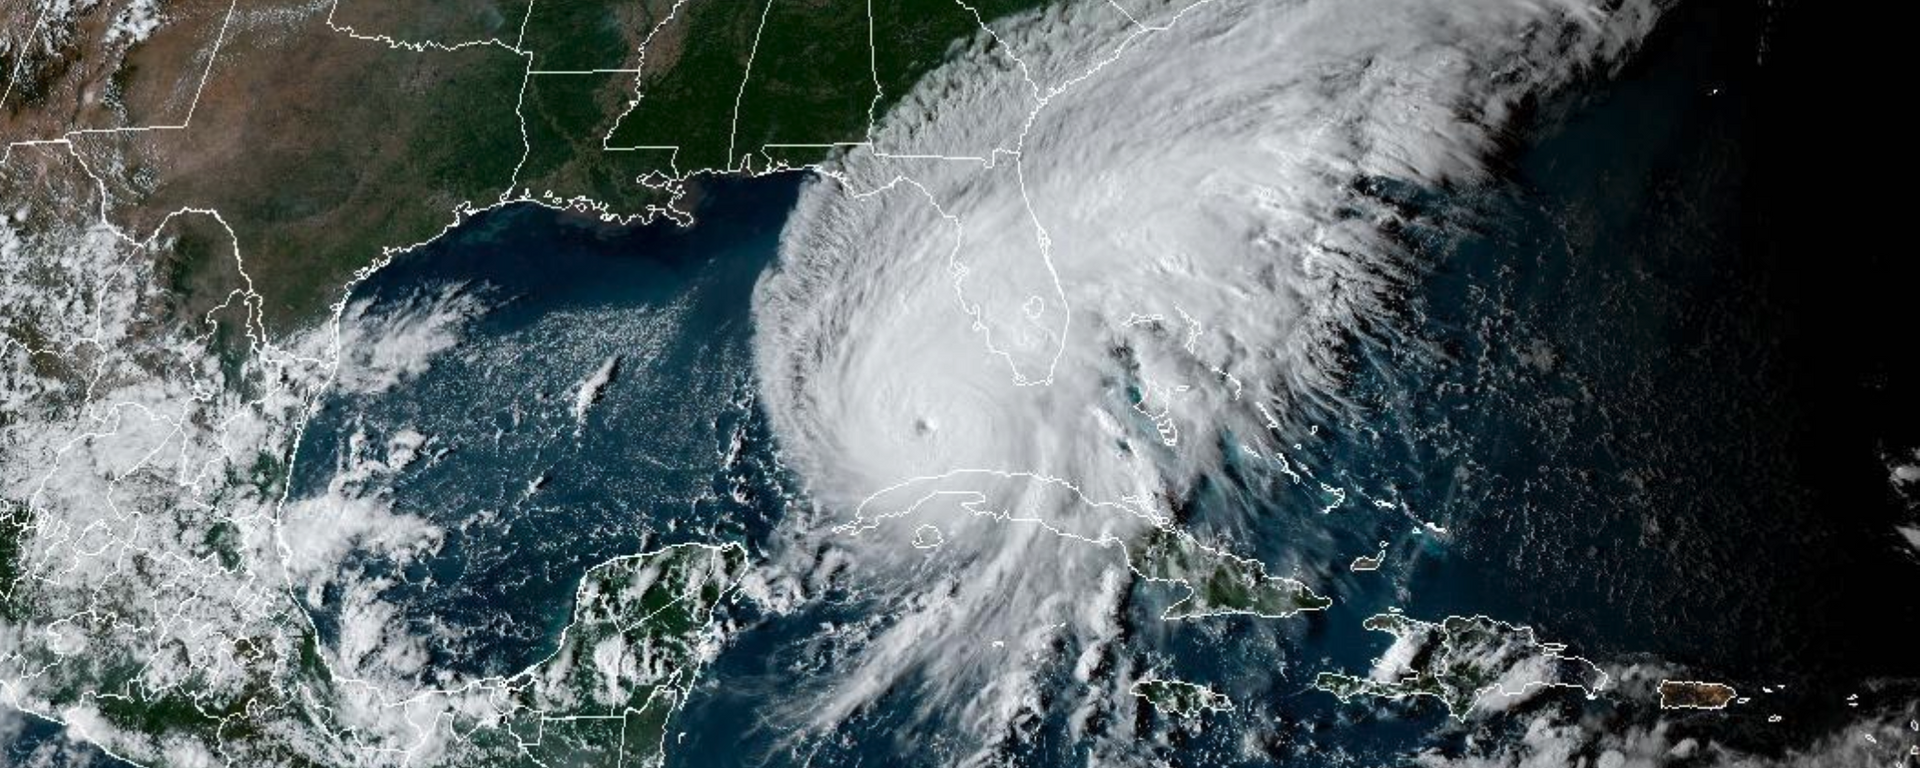 This GOES-East GeoCcolor satellite image provided by the National Oceanic and Atmospheric Administration captures Hurricane Ian on Tuesday, September 27, 2022, as it churns over the Gulf of Mexico.  - Sputnik International, 1920, 29.09.2022